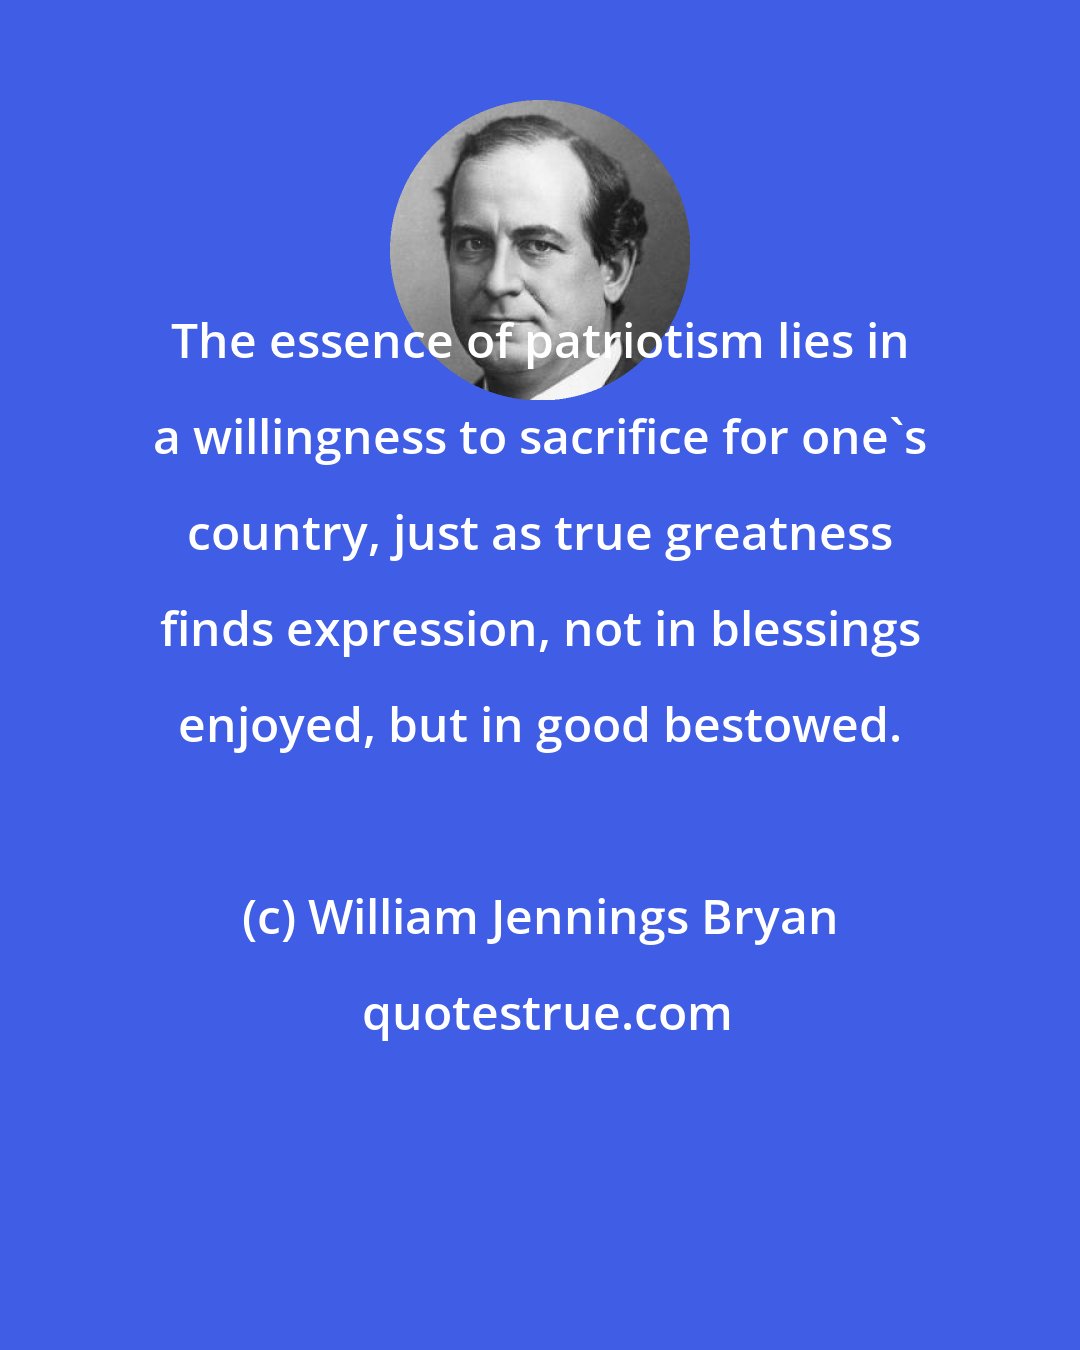 William Jennings Bryan: The essence of patriotism lies in a willingness to sacrifice for one's country, just as true greatness finds expression, not in blessings enjoyed, but in good bestowed.